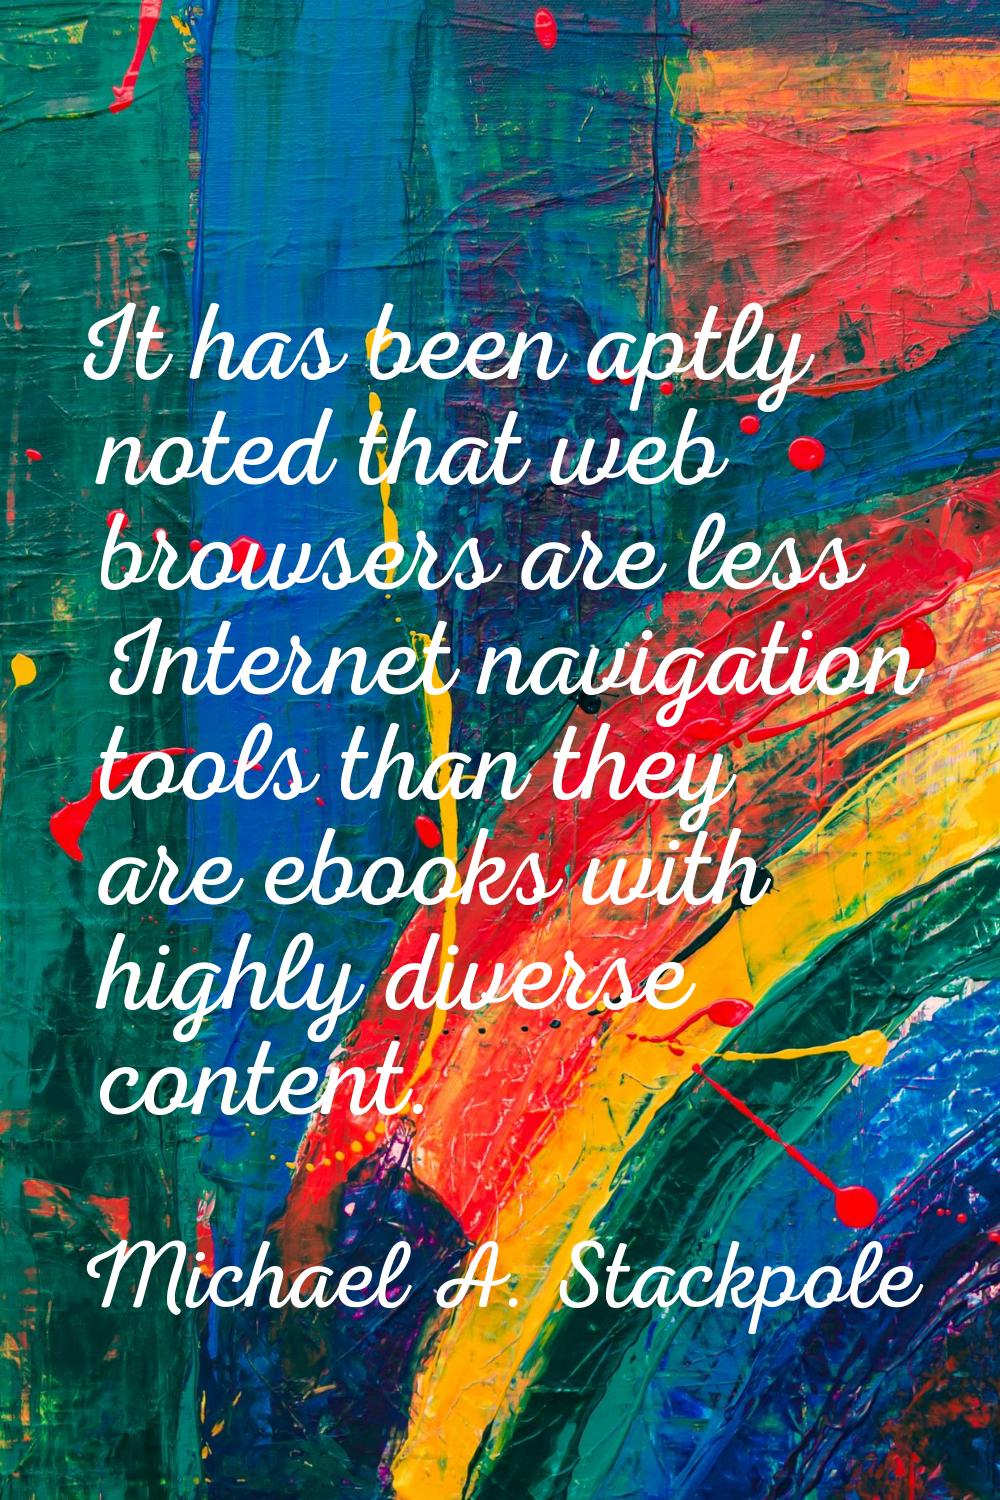 It has been aptly noted that web browsers are less Internet navigation tools than they are ebooks w